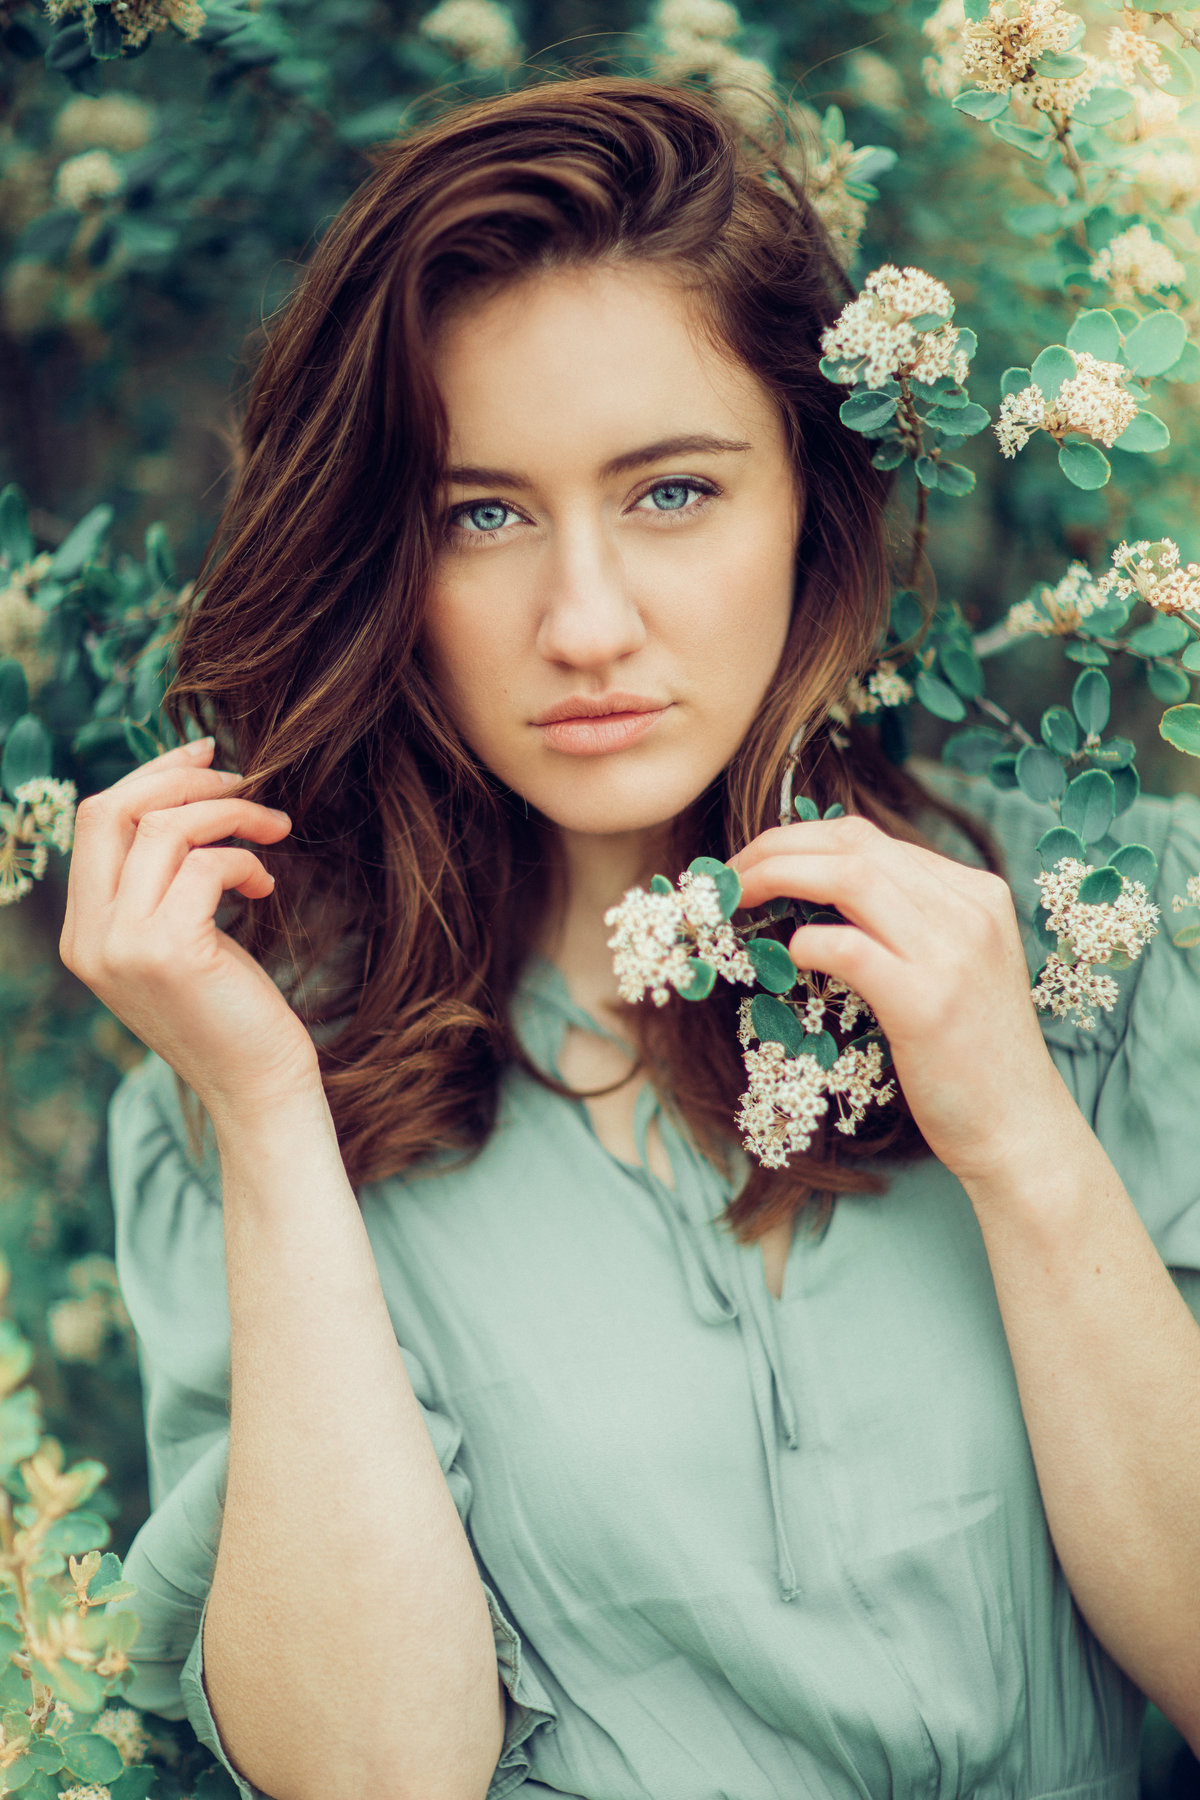 Portrait Photo Of Young Woman In Green Dress Holding White Flowers Los Angeles